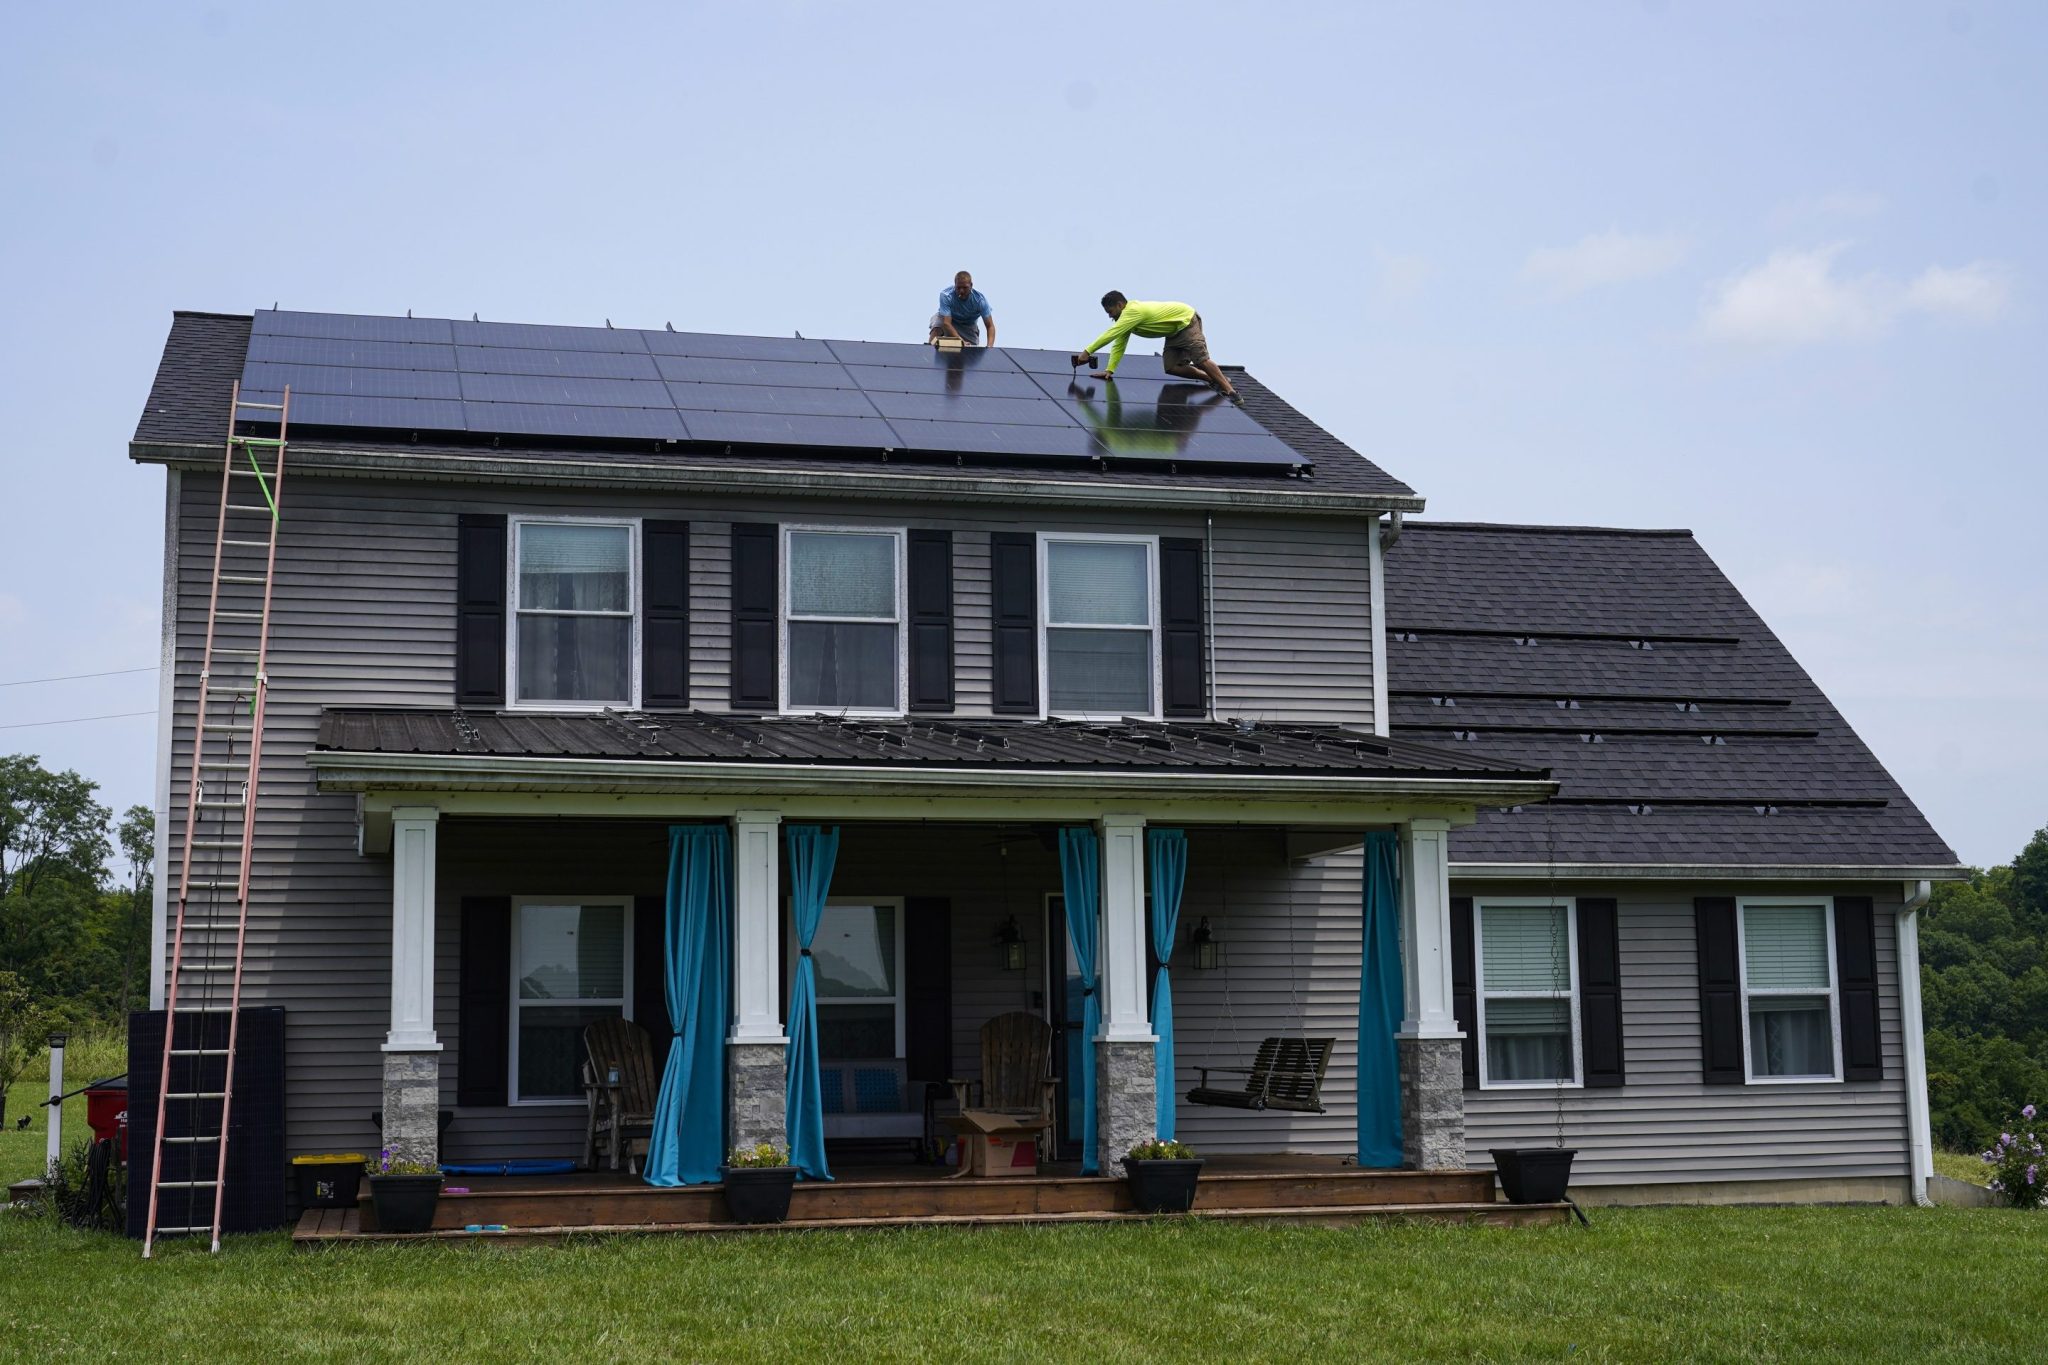 Solar rooftops gain traction as EV owners look to save